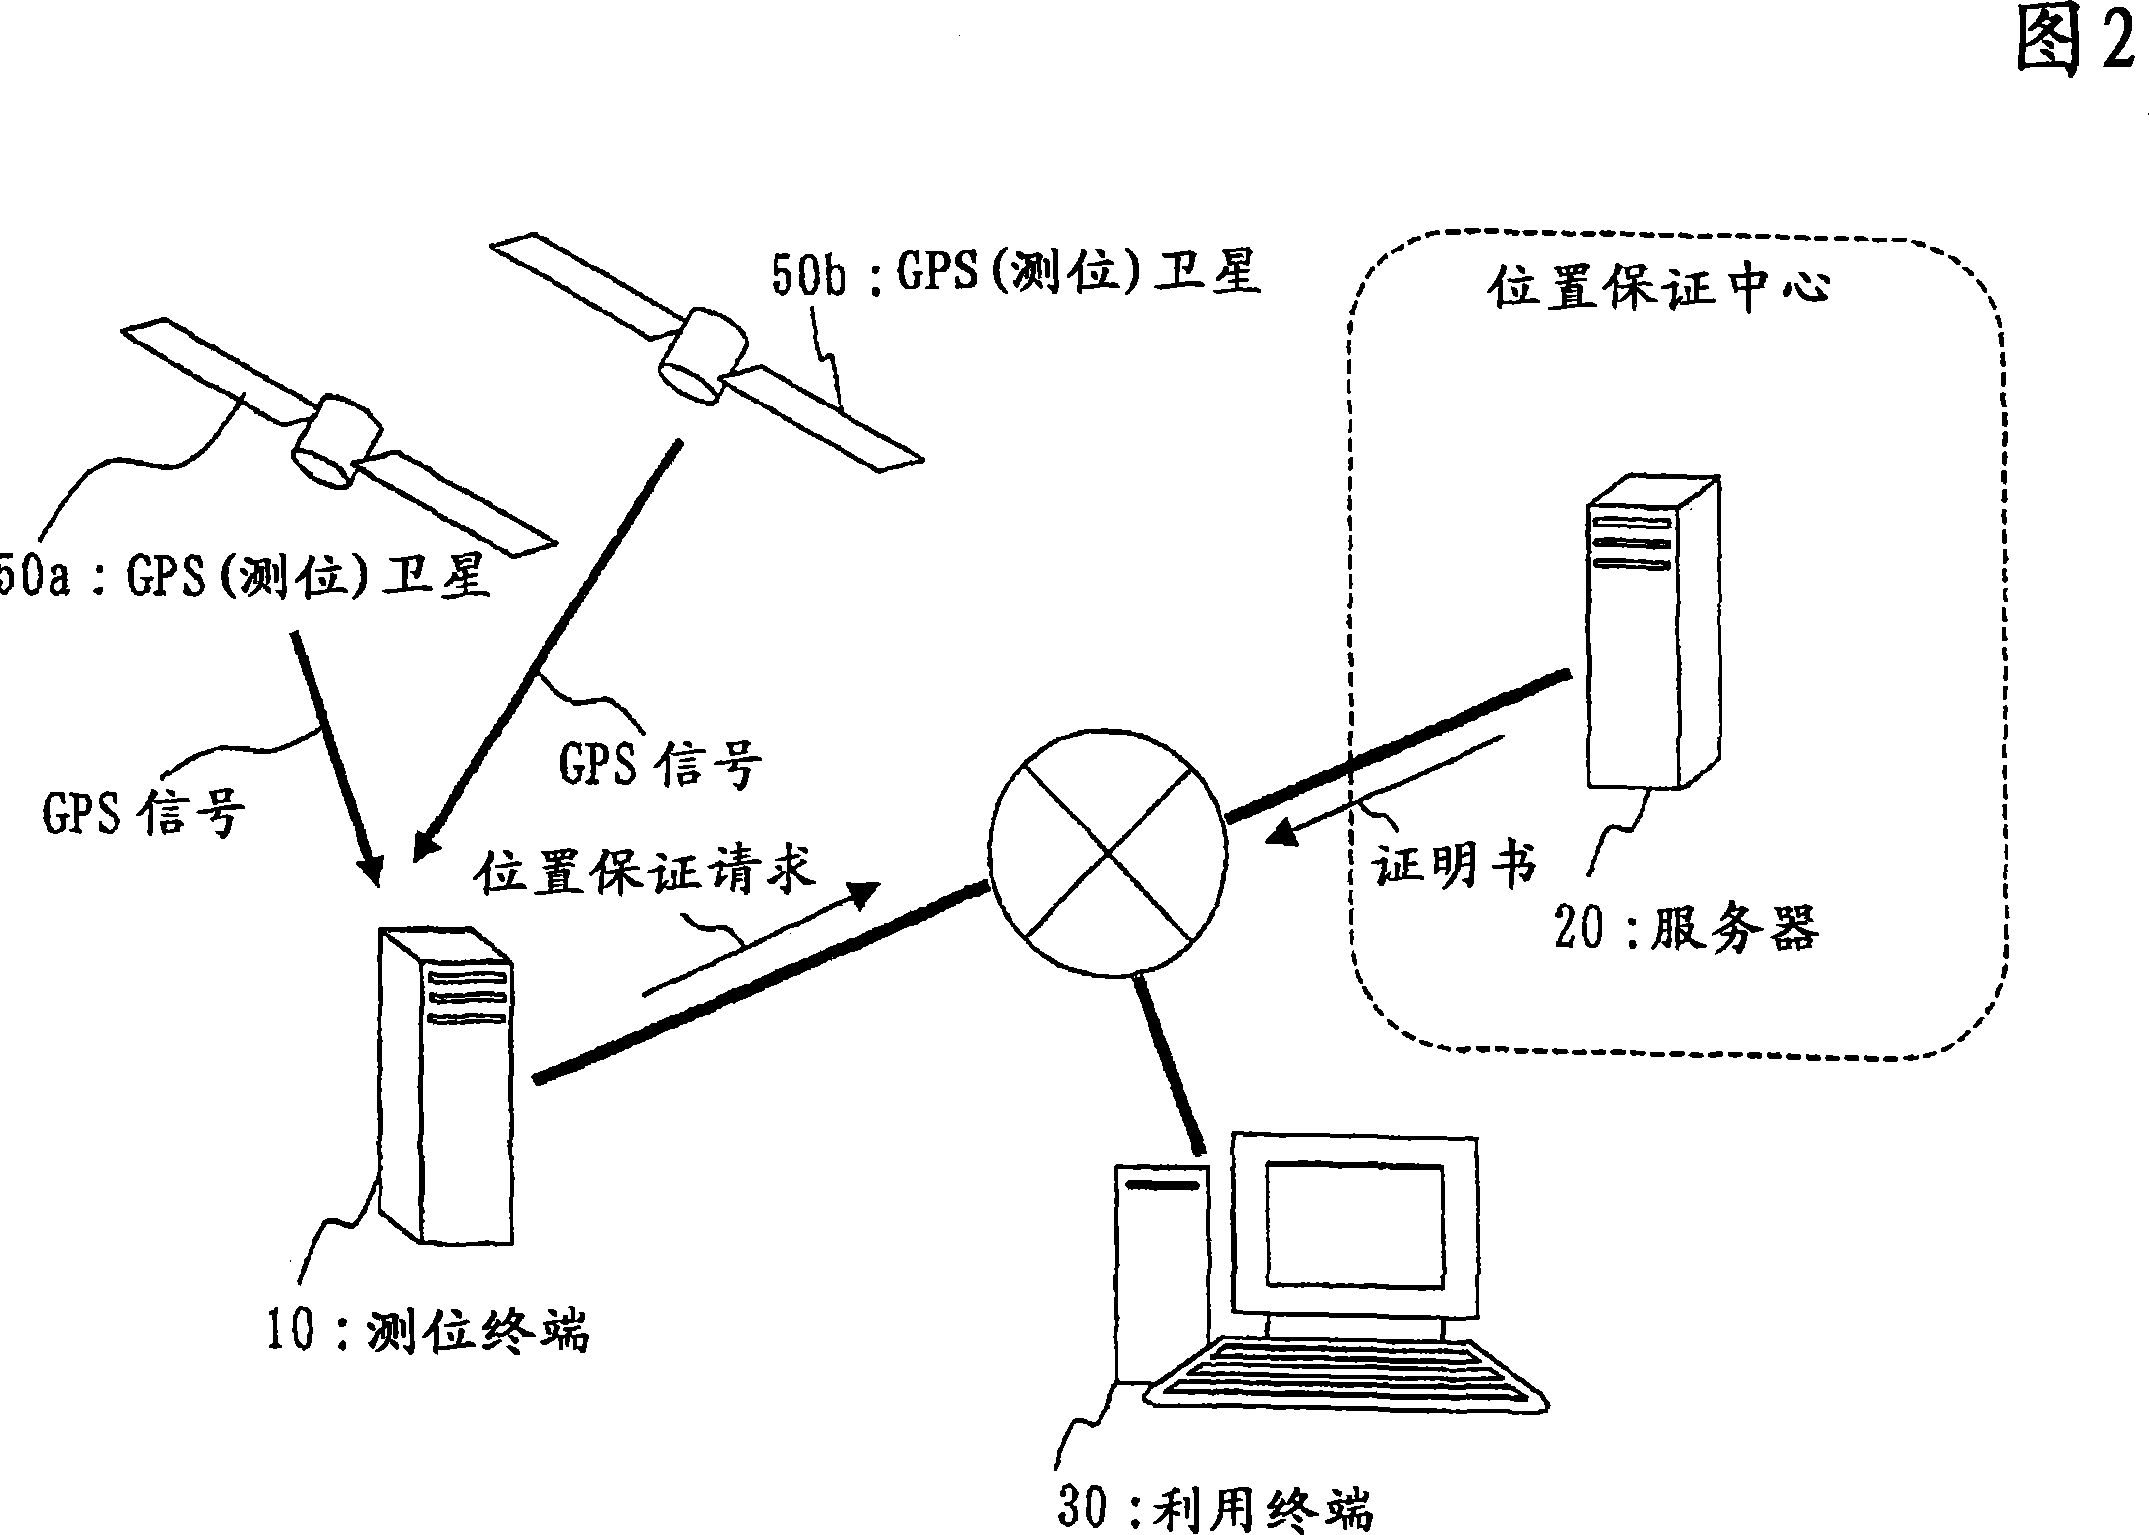 Position guarantee server, position guarantee system, and position guarantee method